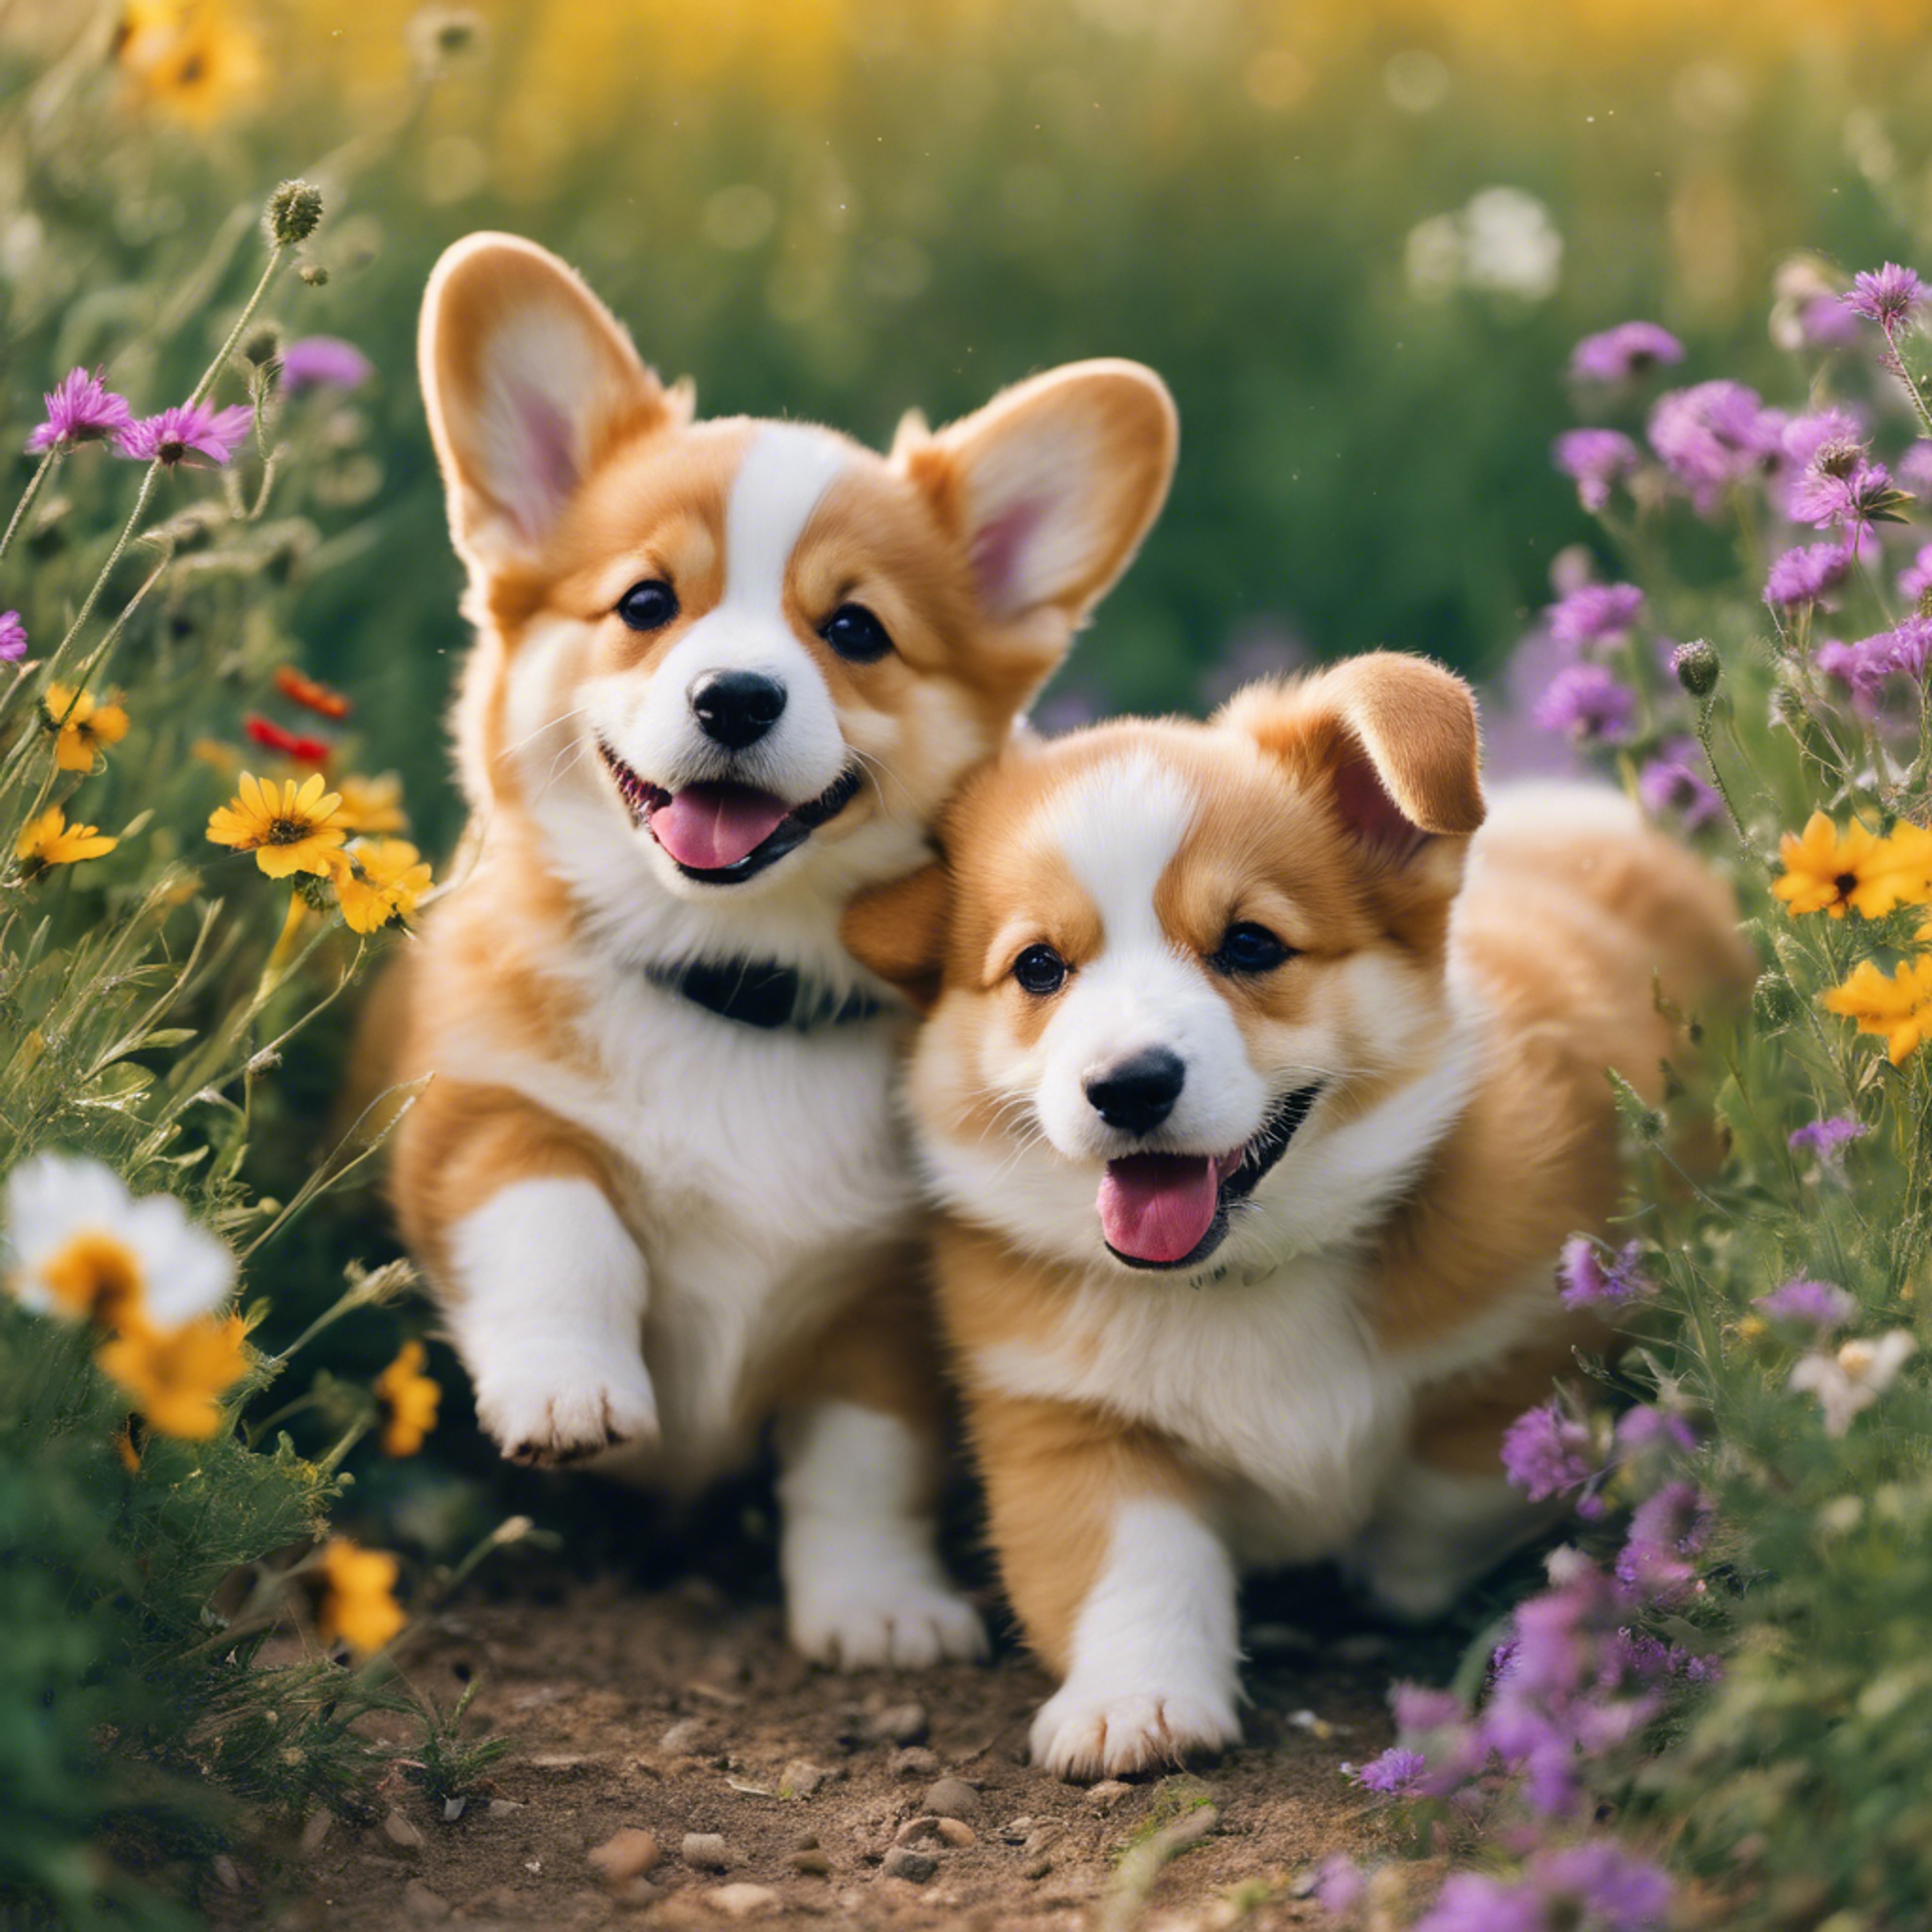 Corgi puppies frolic in a meadow filled with colourful wildflowers. Wallpaper[ff39099a16654d489ef7]